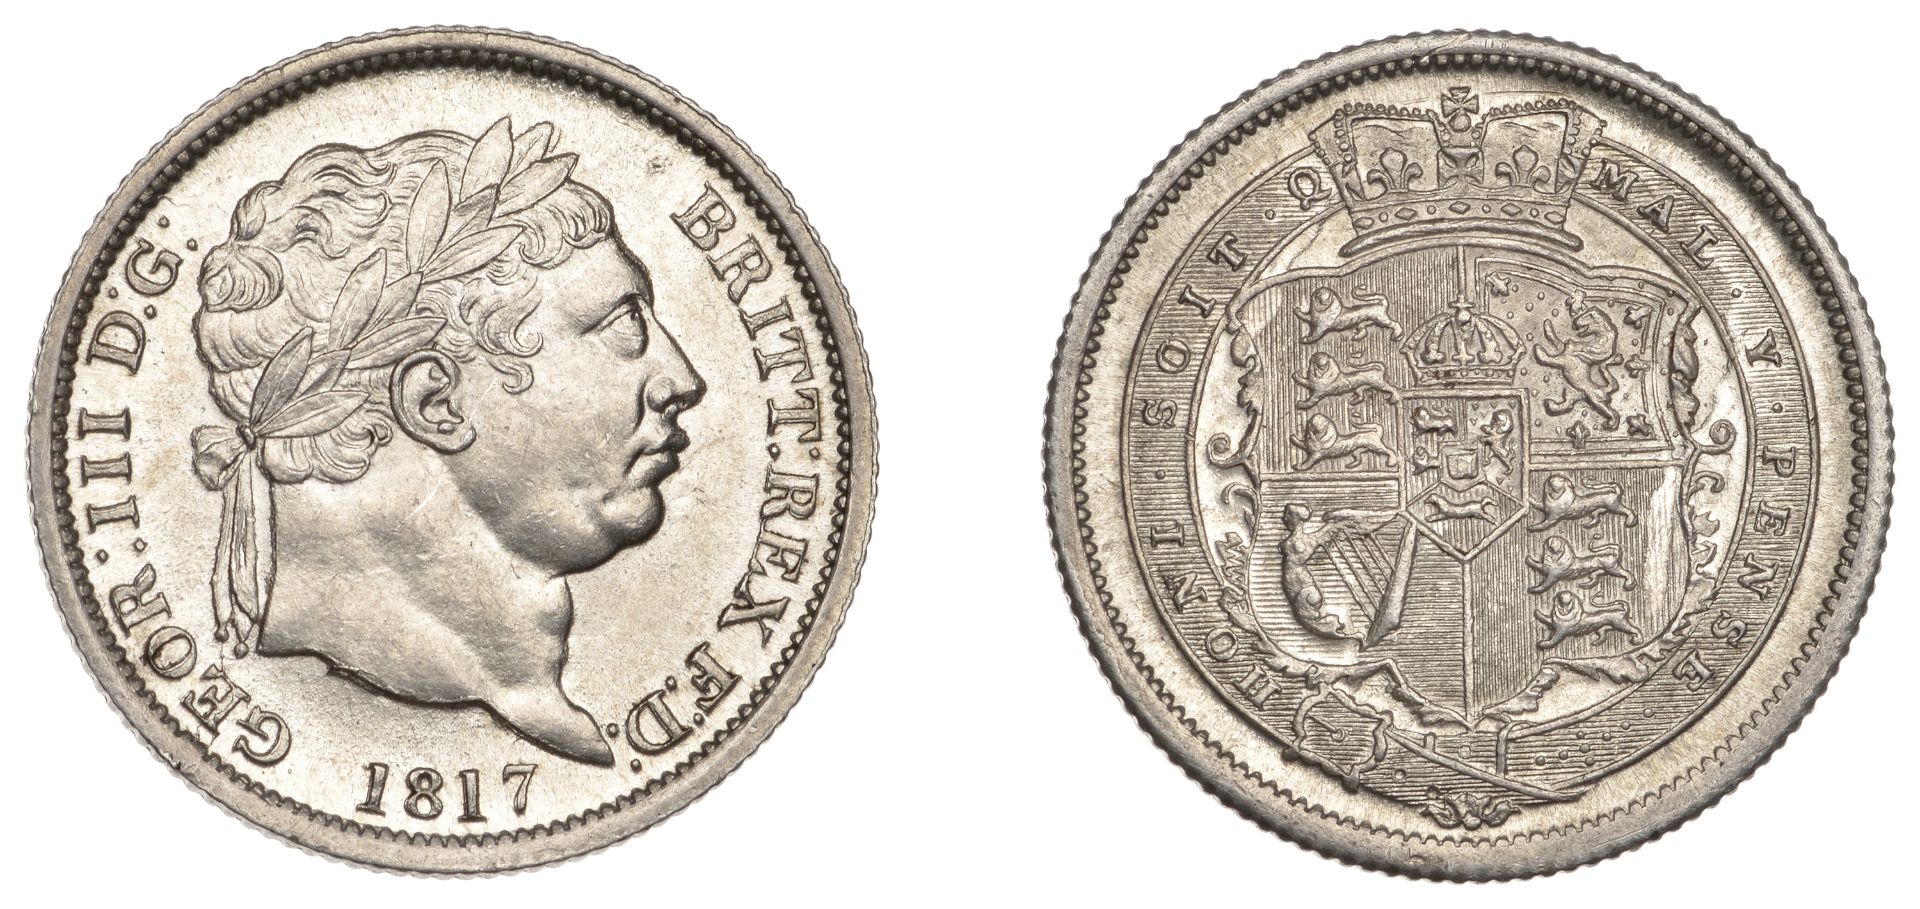 George III (1760-1820), New coinage, Shilling, 1817 (ESC 2144; S 3790). Small cut on rim at...